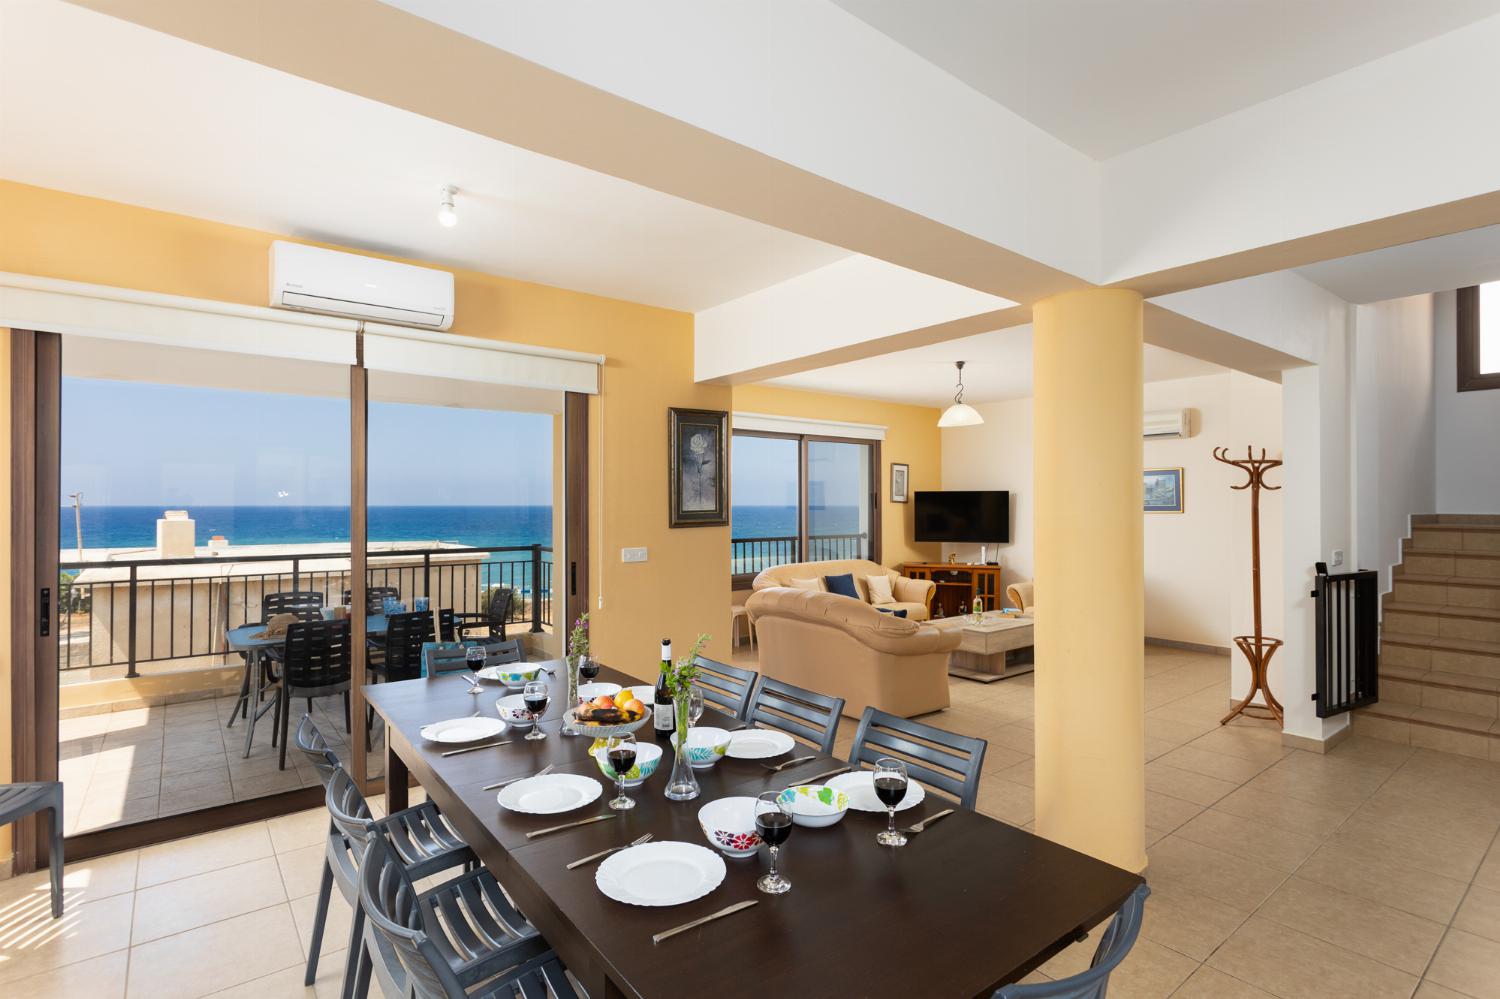 Open-plan living room with sofas, dining area, kitchen, A/C, WiFi internet, satellite TV, and sea views